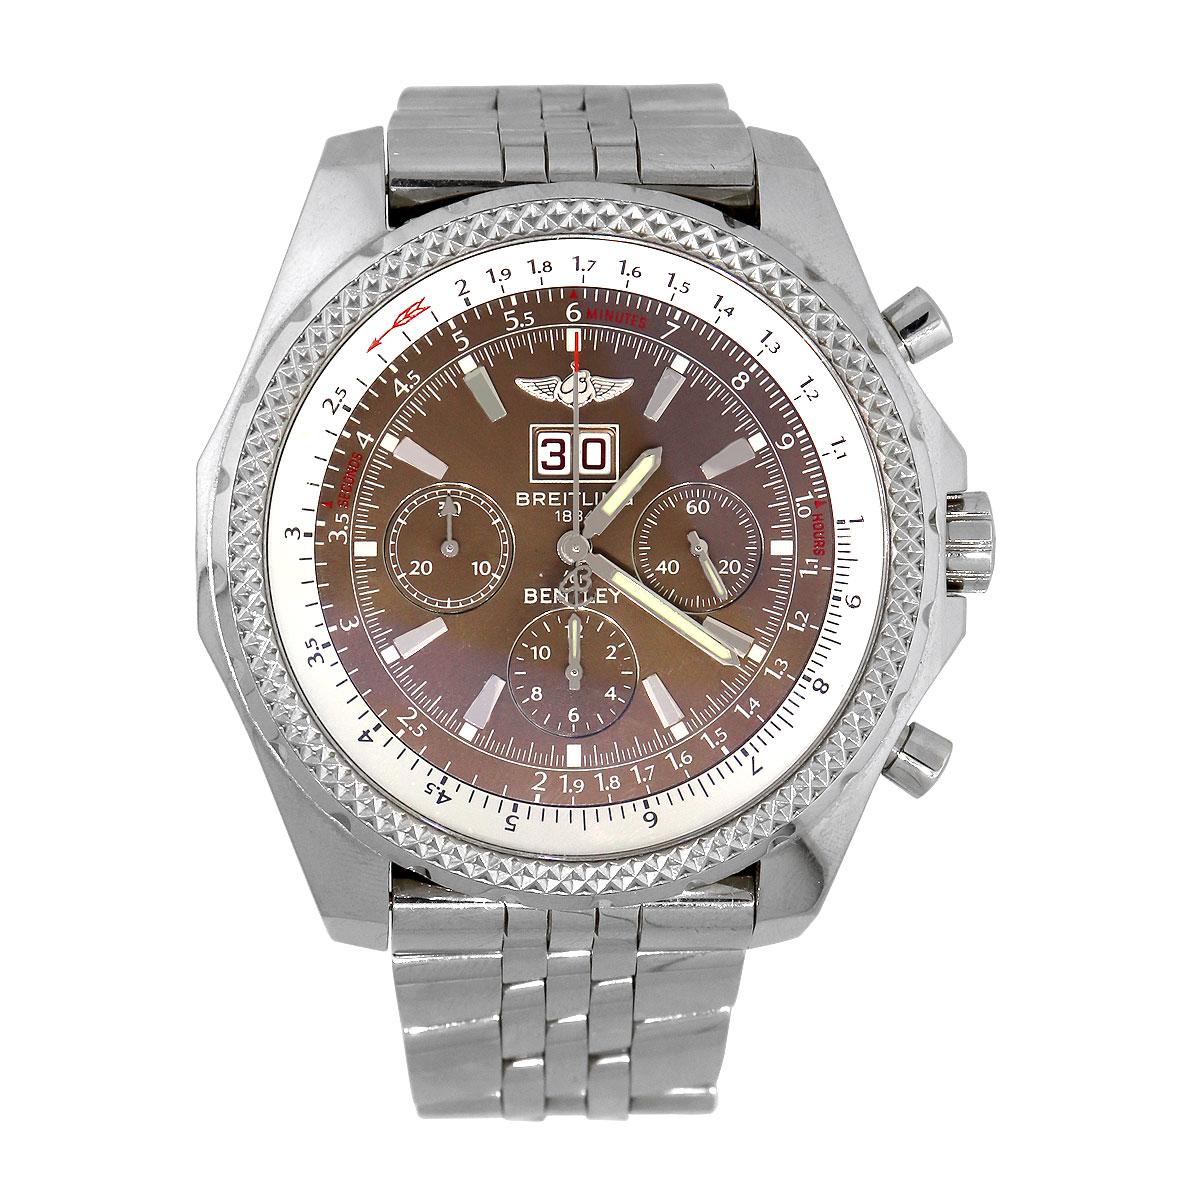 Brand: Breitling
MPN: A44362
Model: Bentley
Case Material: Stainless Steel
Case Diameter: 49mm
Crystal: Sapphire
Bezel: Stainless steel bidirectional rotating bezel.
Dial: Bronze dial. Luminescent stainless steel outlined hands and hour markers.